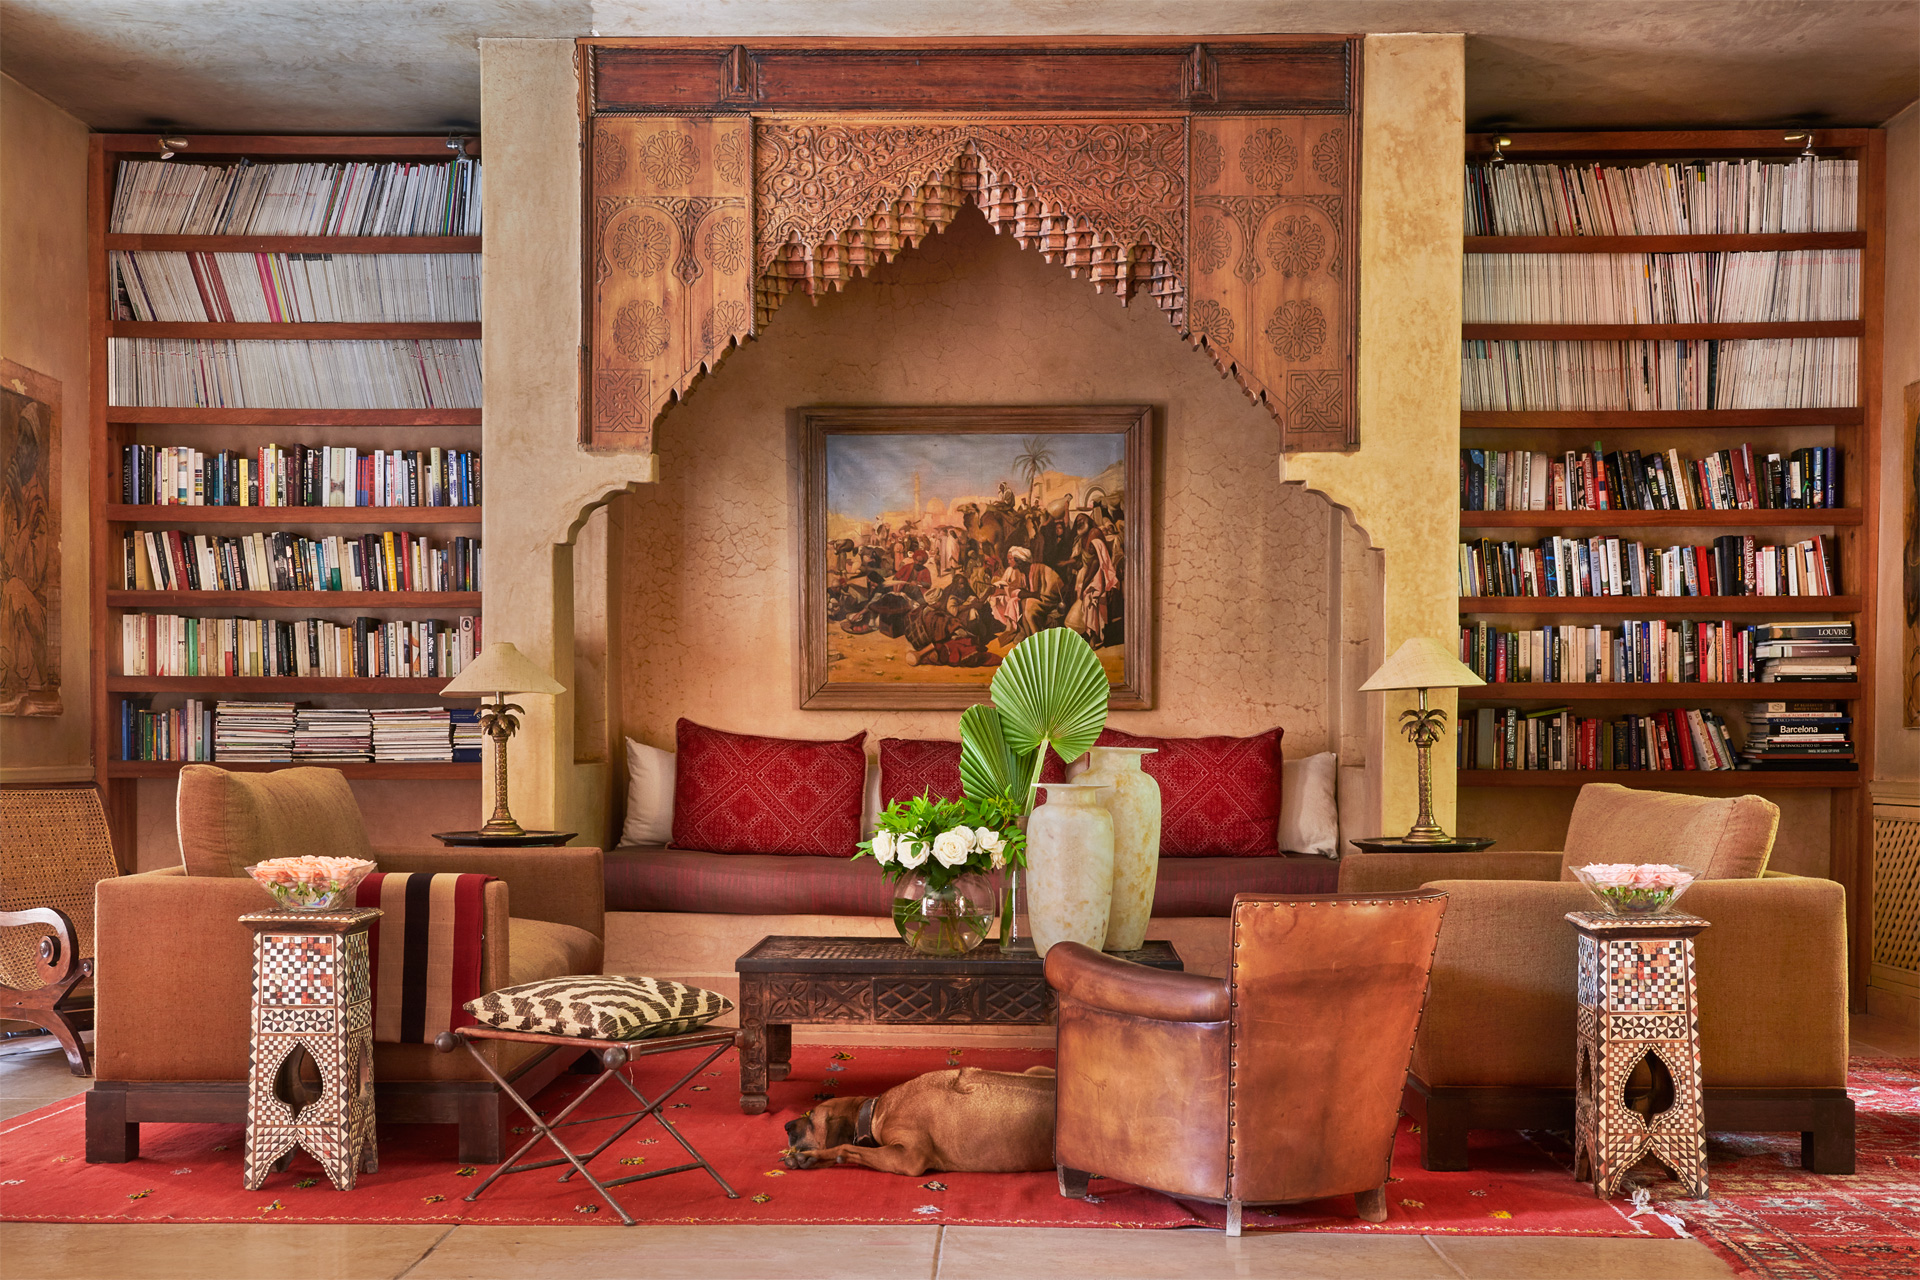 Library with red and wooden accents